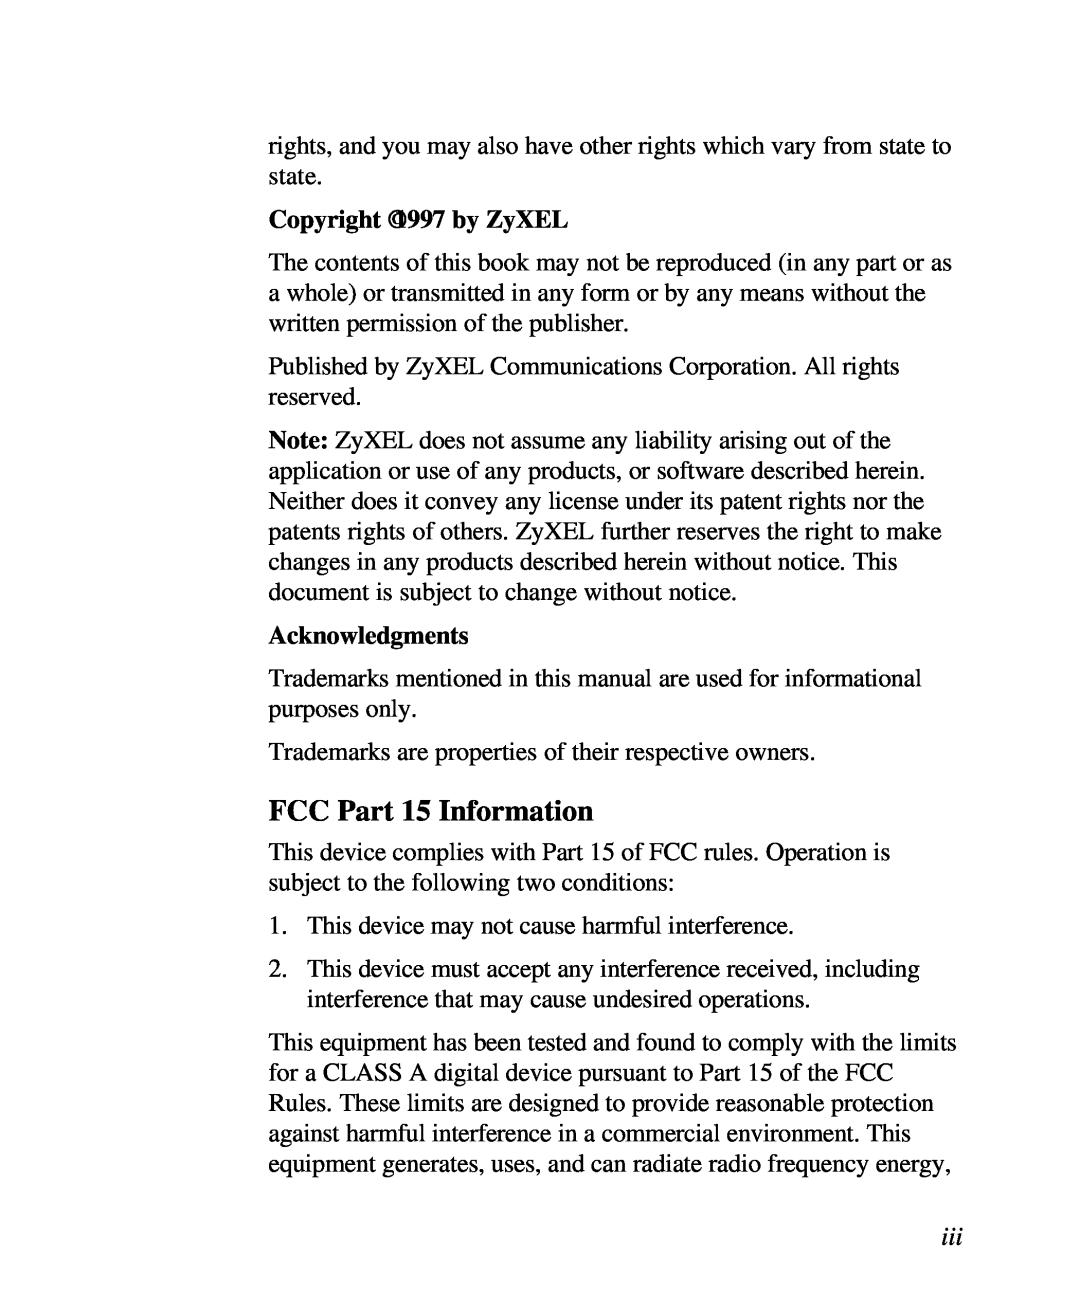 ZyXEL Communications U-336R/RE manual FCC Part 15 Information, Copyright 1997 by ZyXEL, Acknowledgments 